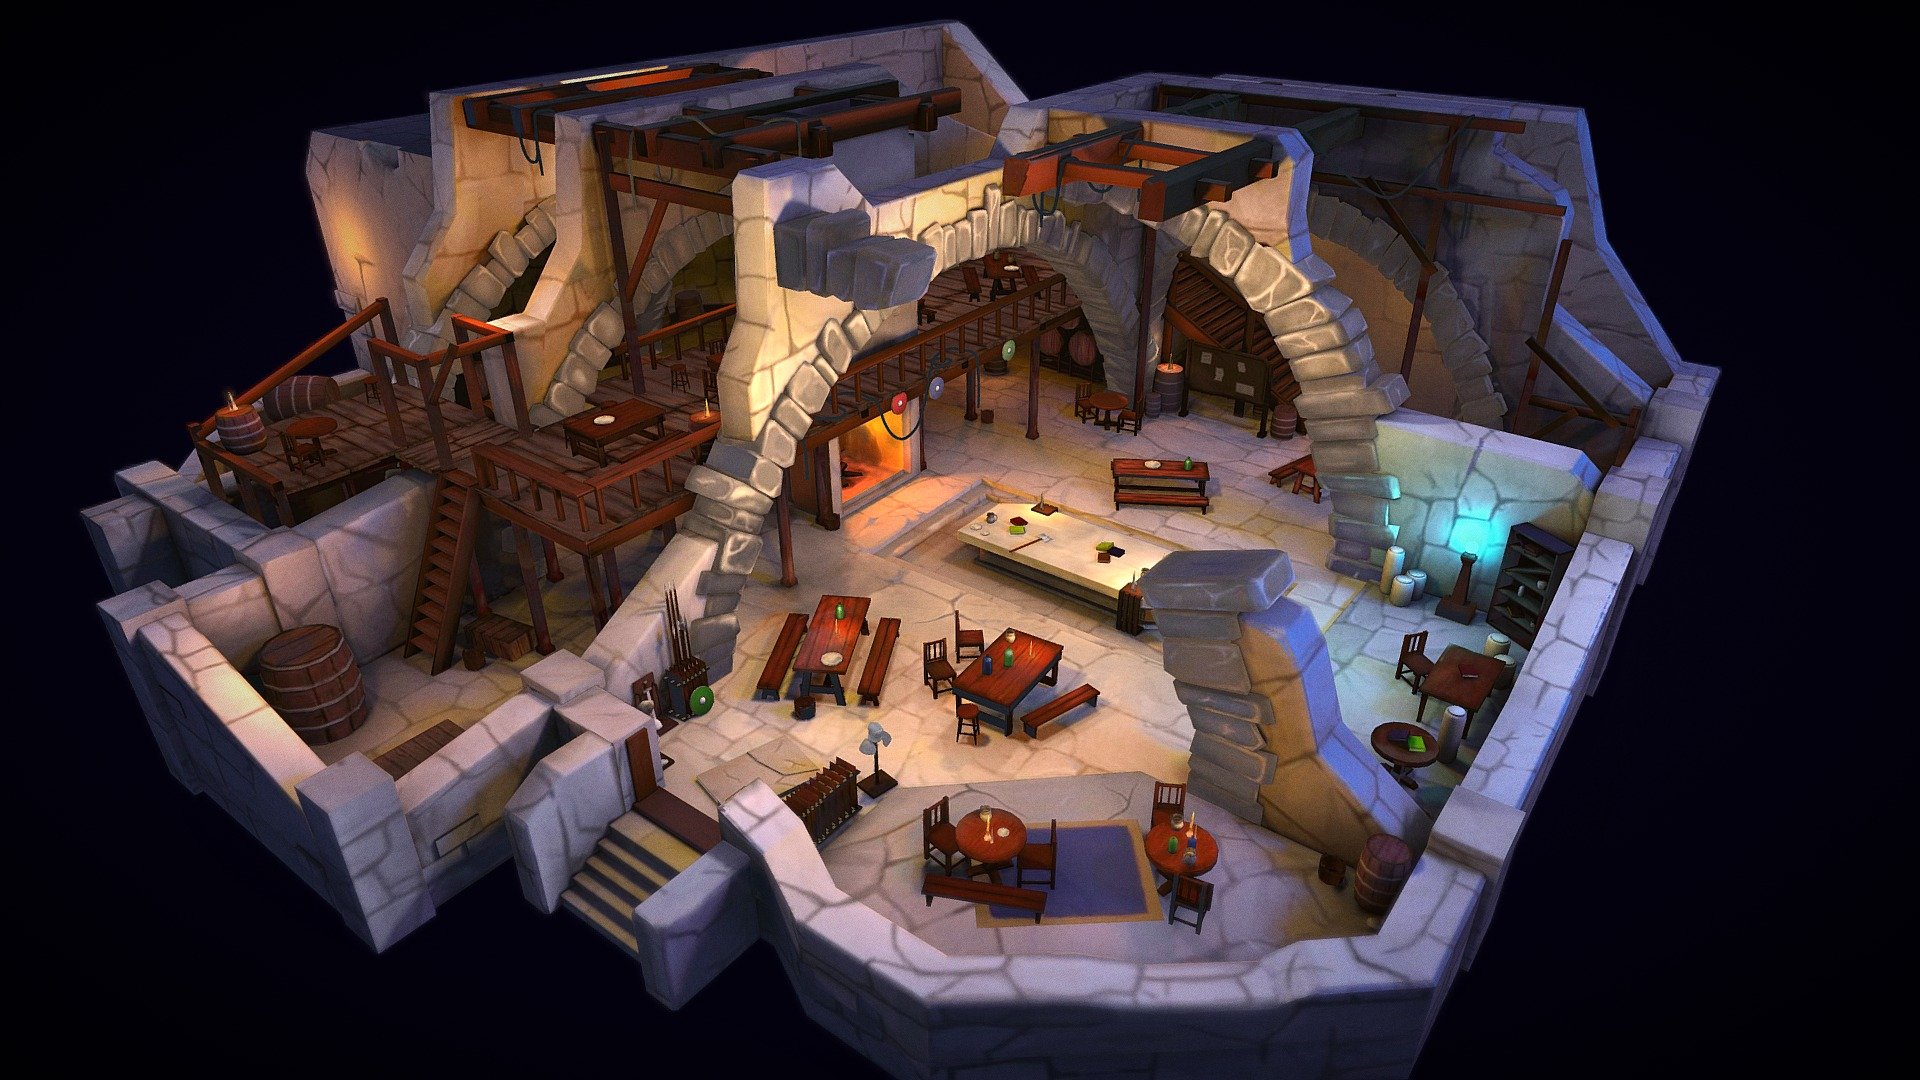 Stylized Tavern &amp; Guild Hall project. inspired and based on fantastic art by Su Wang.
https://www.artstation.com/artwork/gDJRP

This is my first artwork, so still have a lot to improve. Thanks for watching!)

Software: 3ds max, 3d coat - Tavern & Guild Hall - 3D model by Anton Kanavalau (@toharik) 3d model